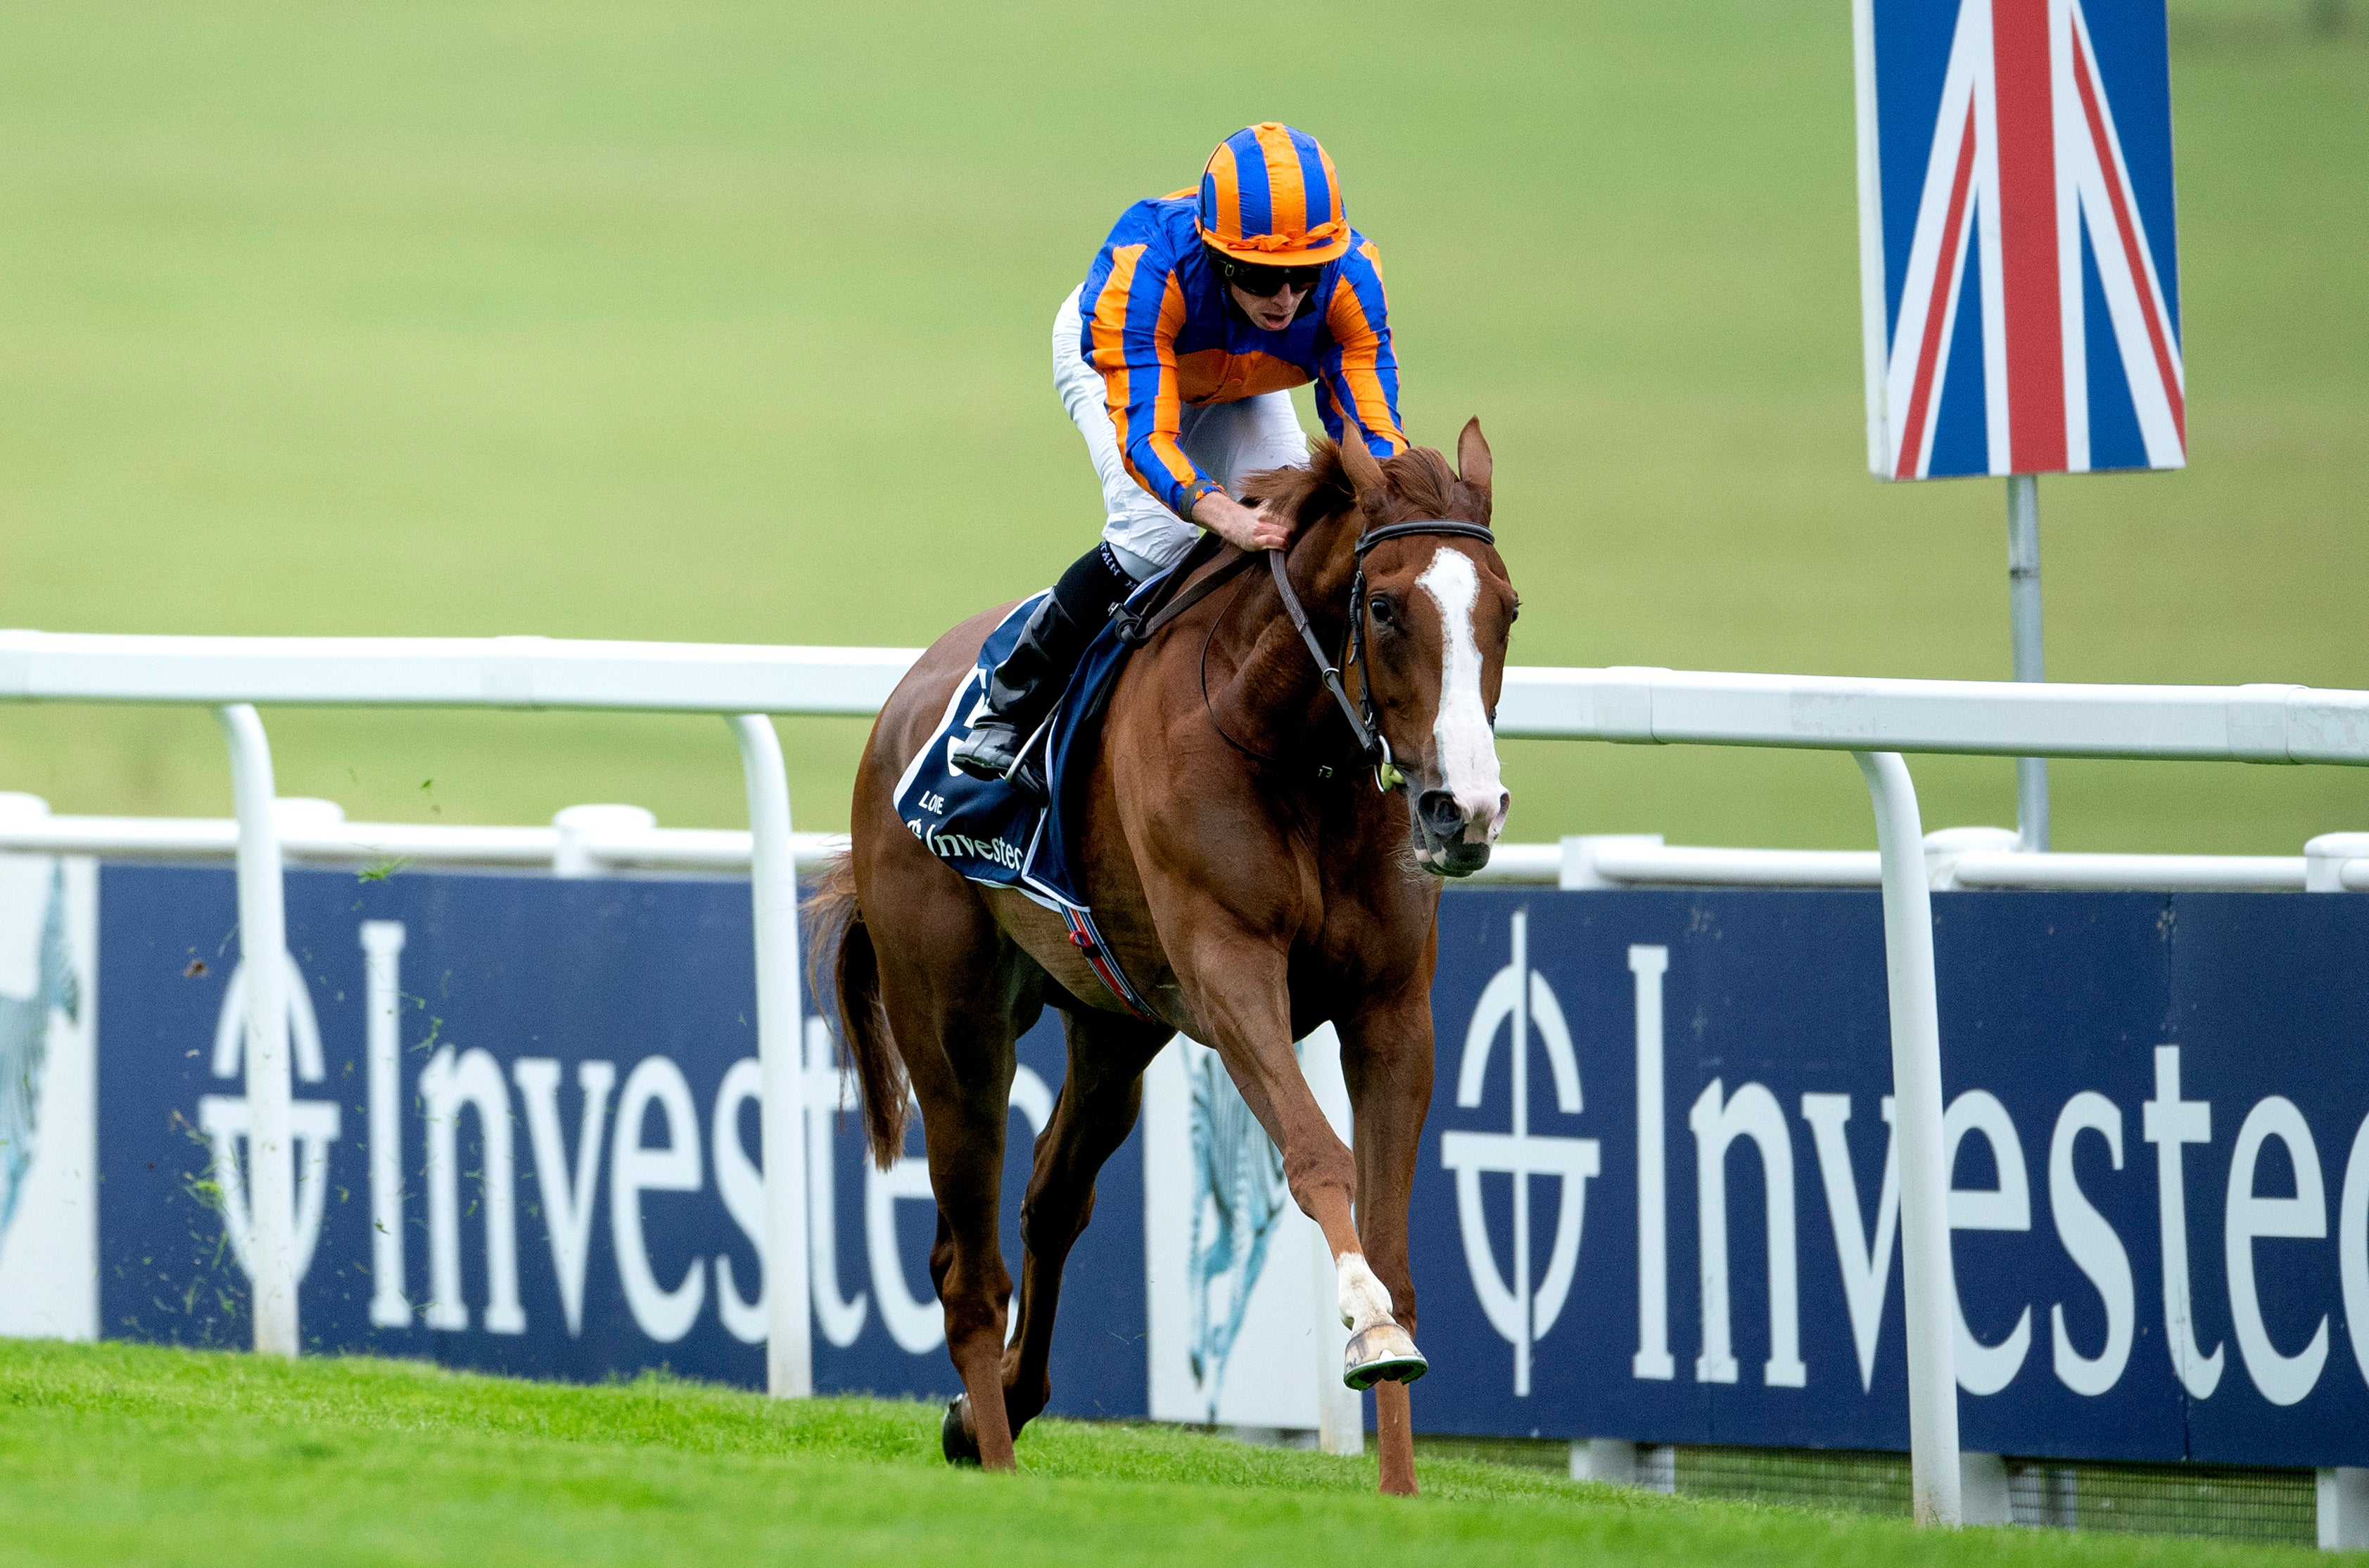 Love was a brilliant winner of last year's Oaks at Epsom